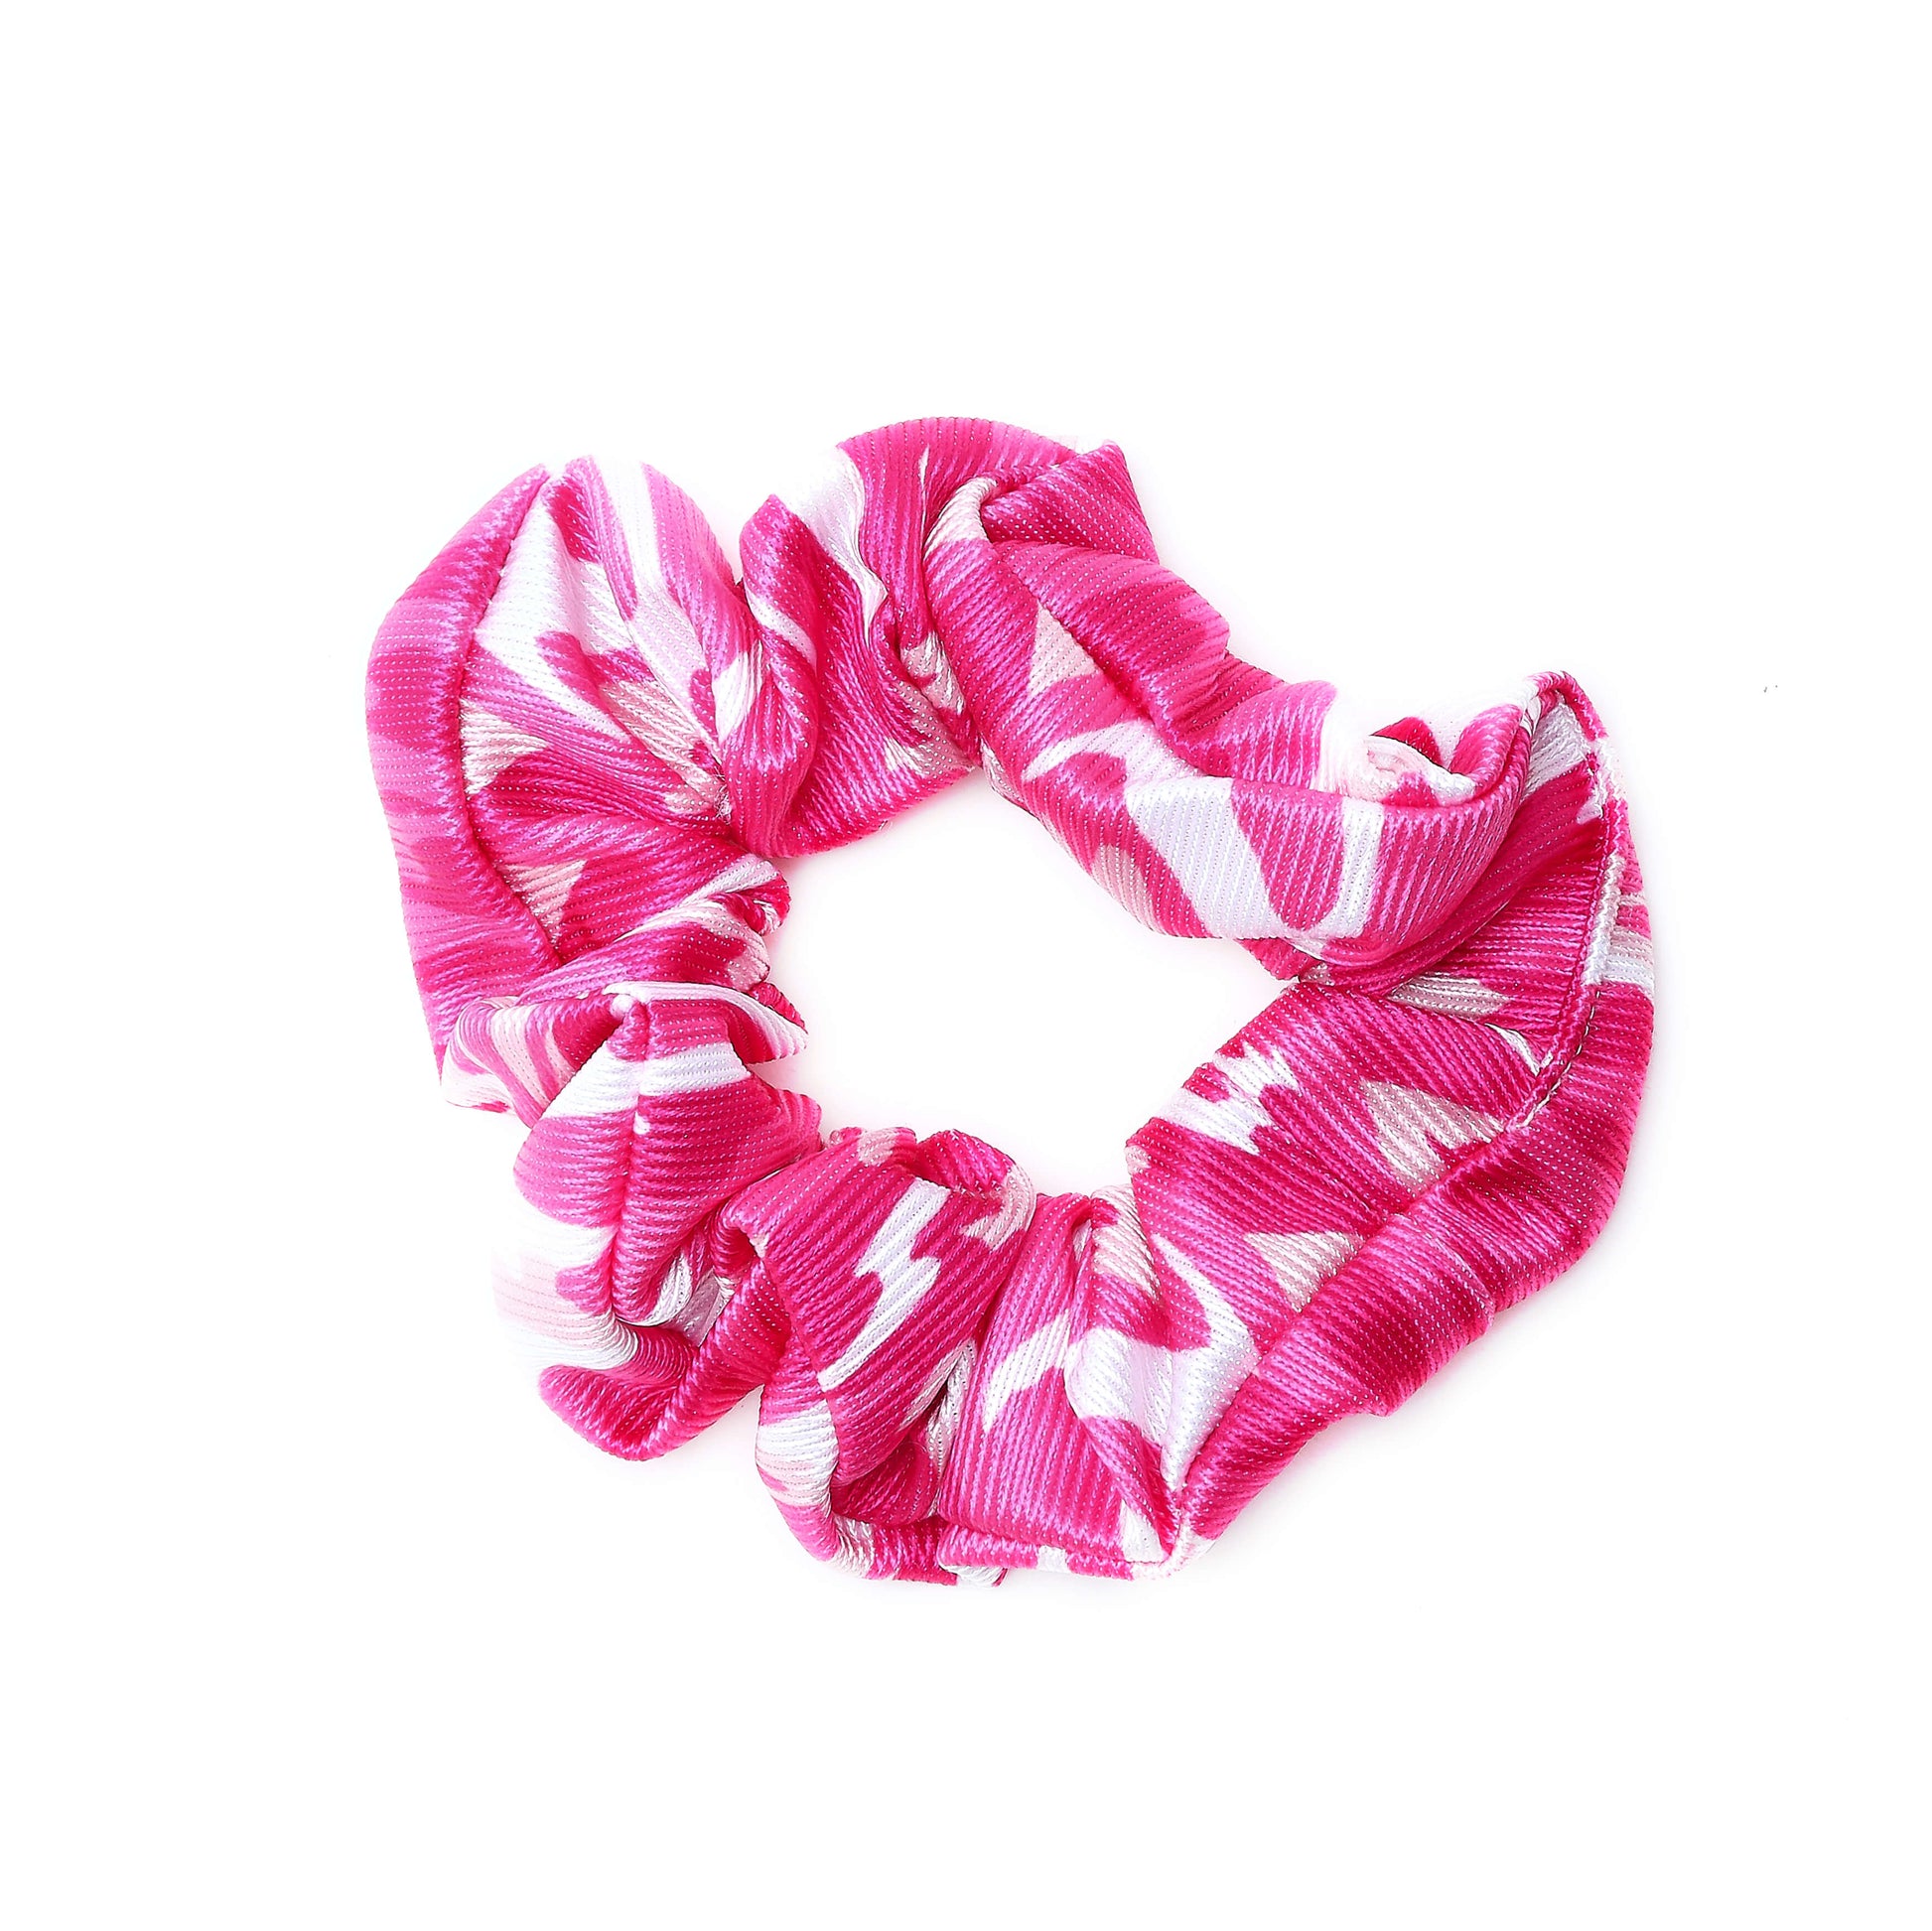 Pastry Scrunchie in Camo Pink